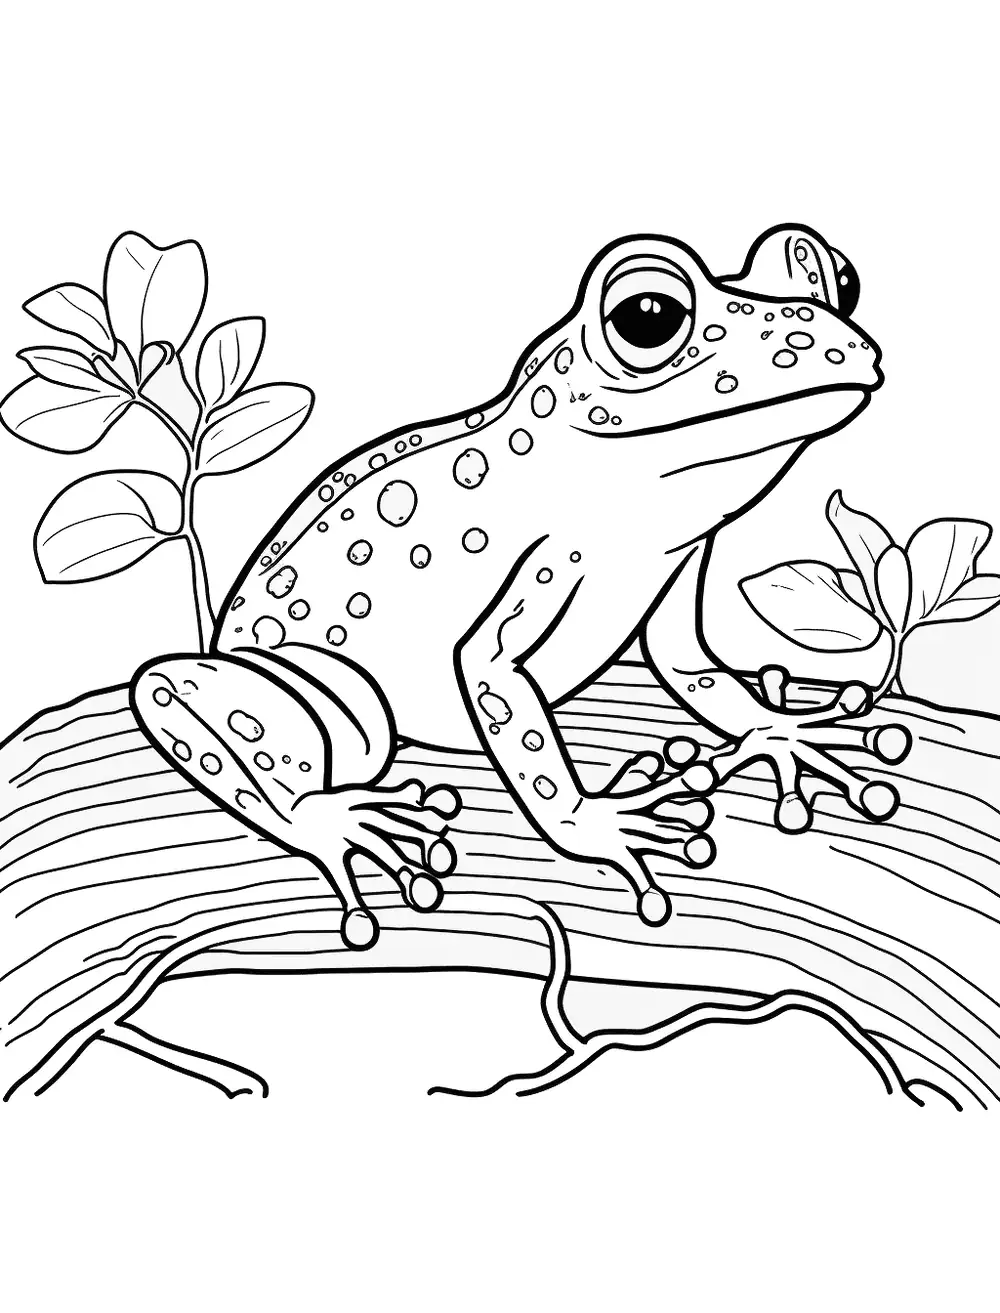 Tree Frog On A Branch Coloring Page - A tree frog sitting on a branch, with leaves and flowers